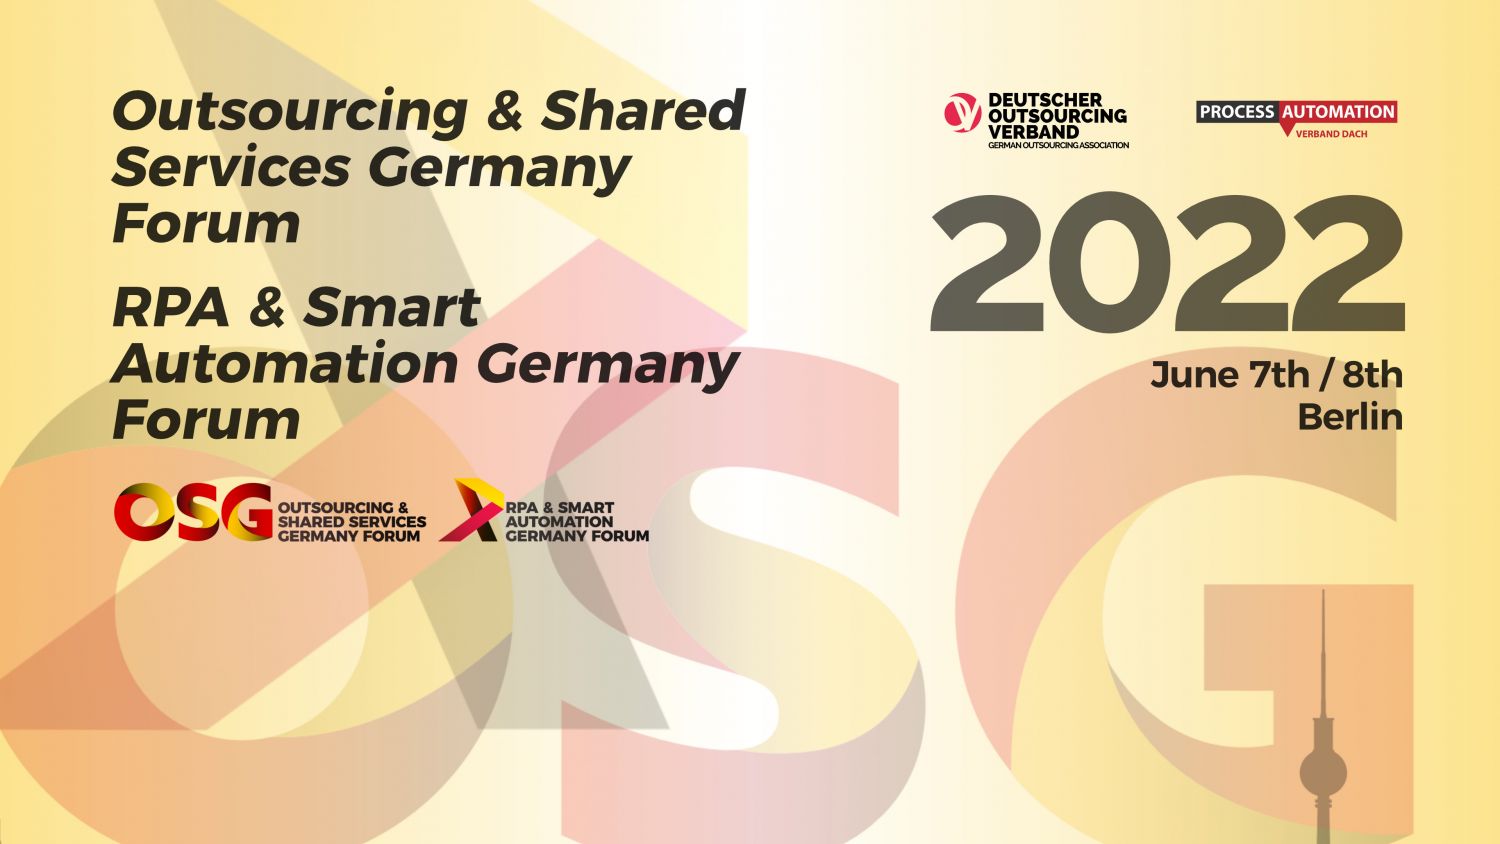 Outsourcing & Shared Services Germany Forum + RPA & Smart Automation Germany Forum in Berlin